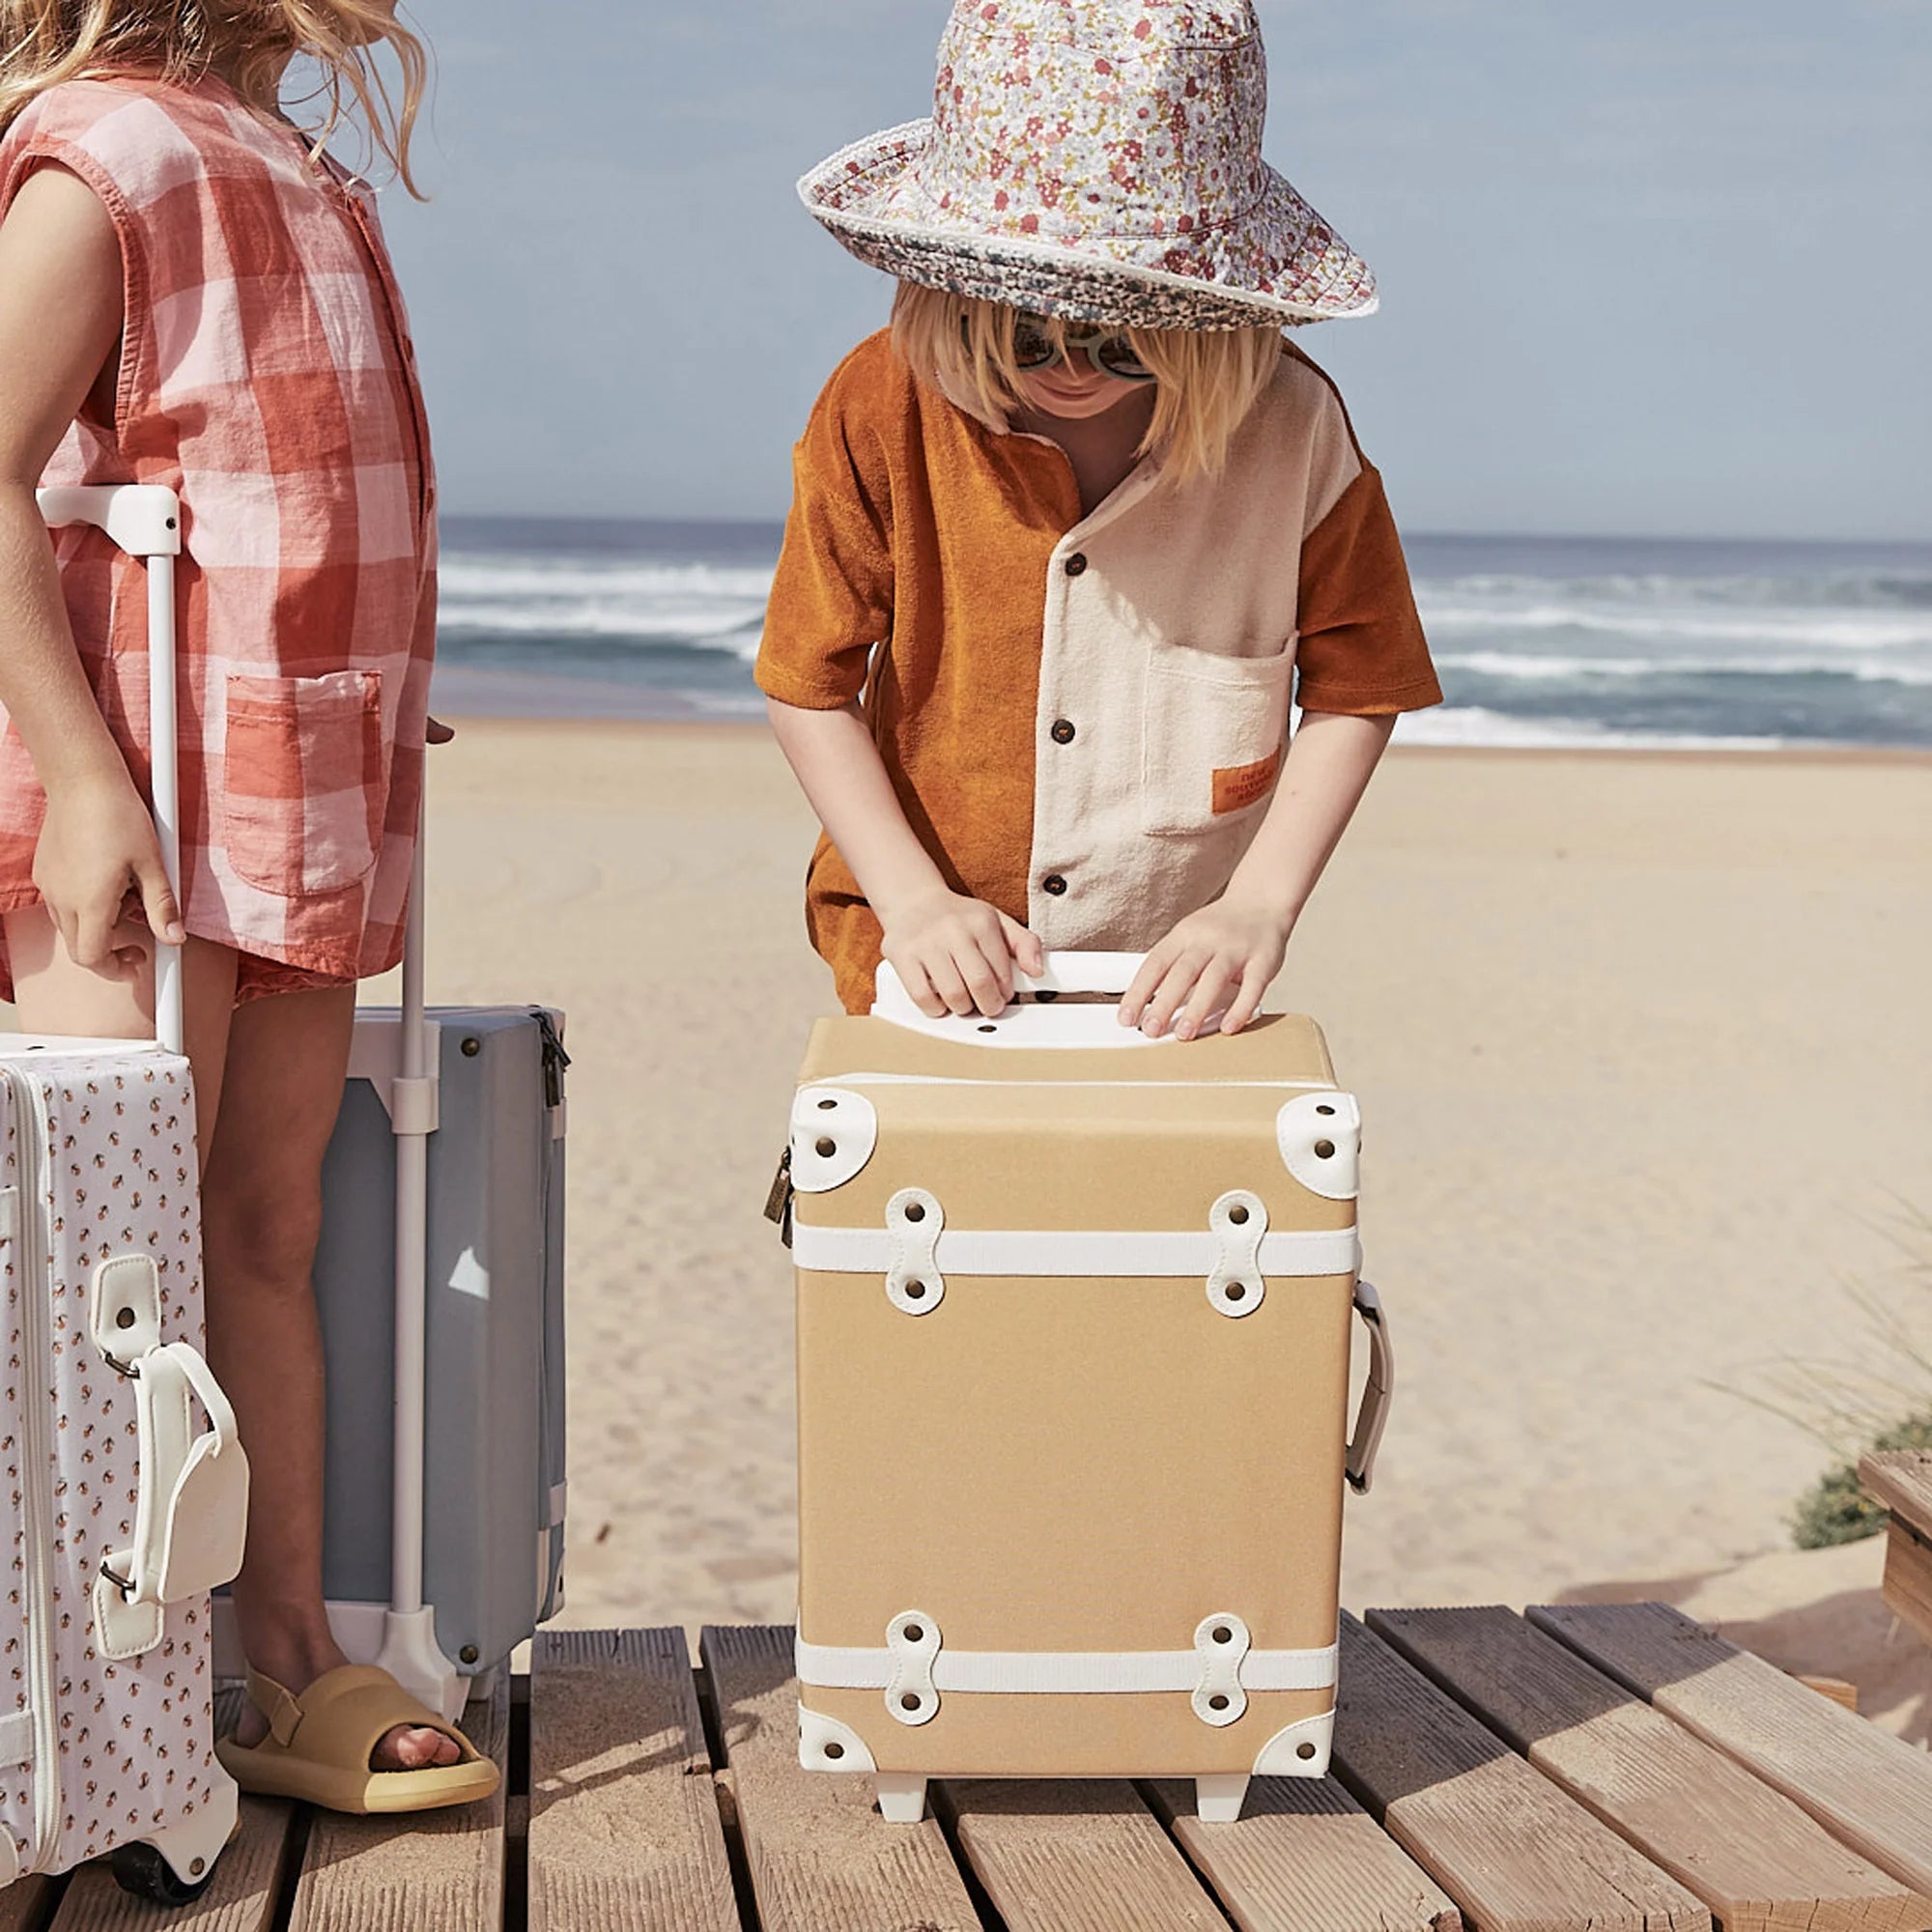 Kids Travel Suitcase - See-Ya Suitcase by Olli Ella in Butterscotch